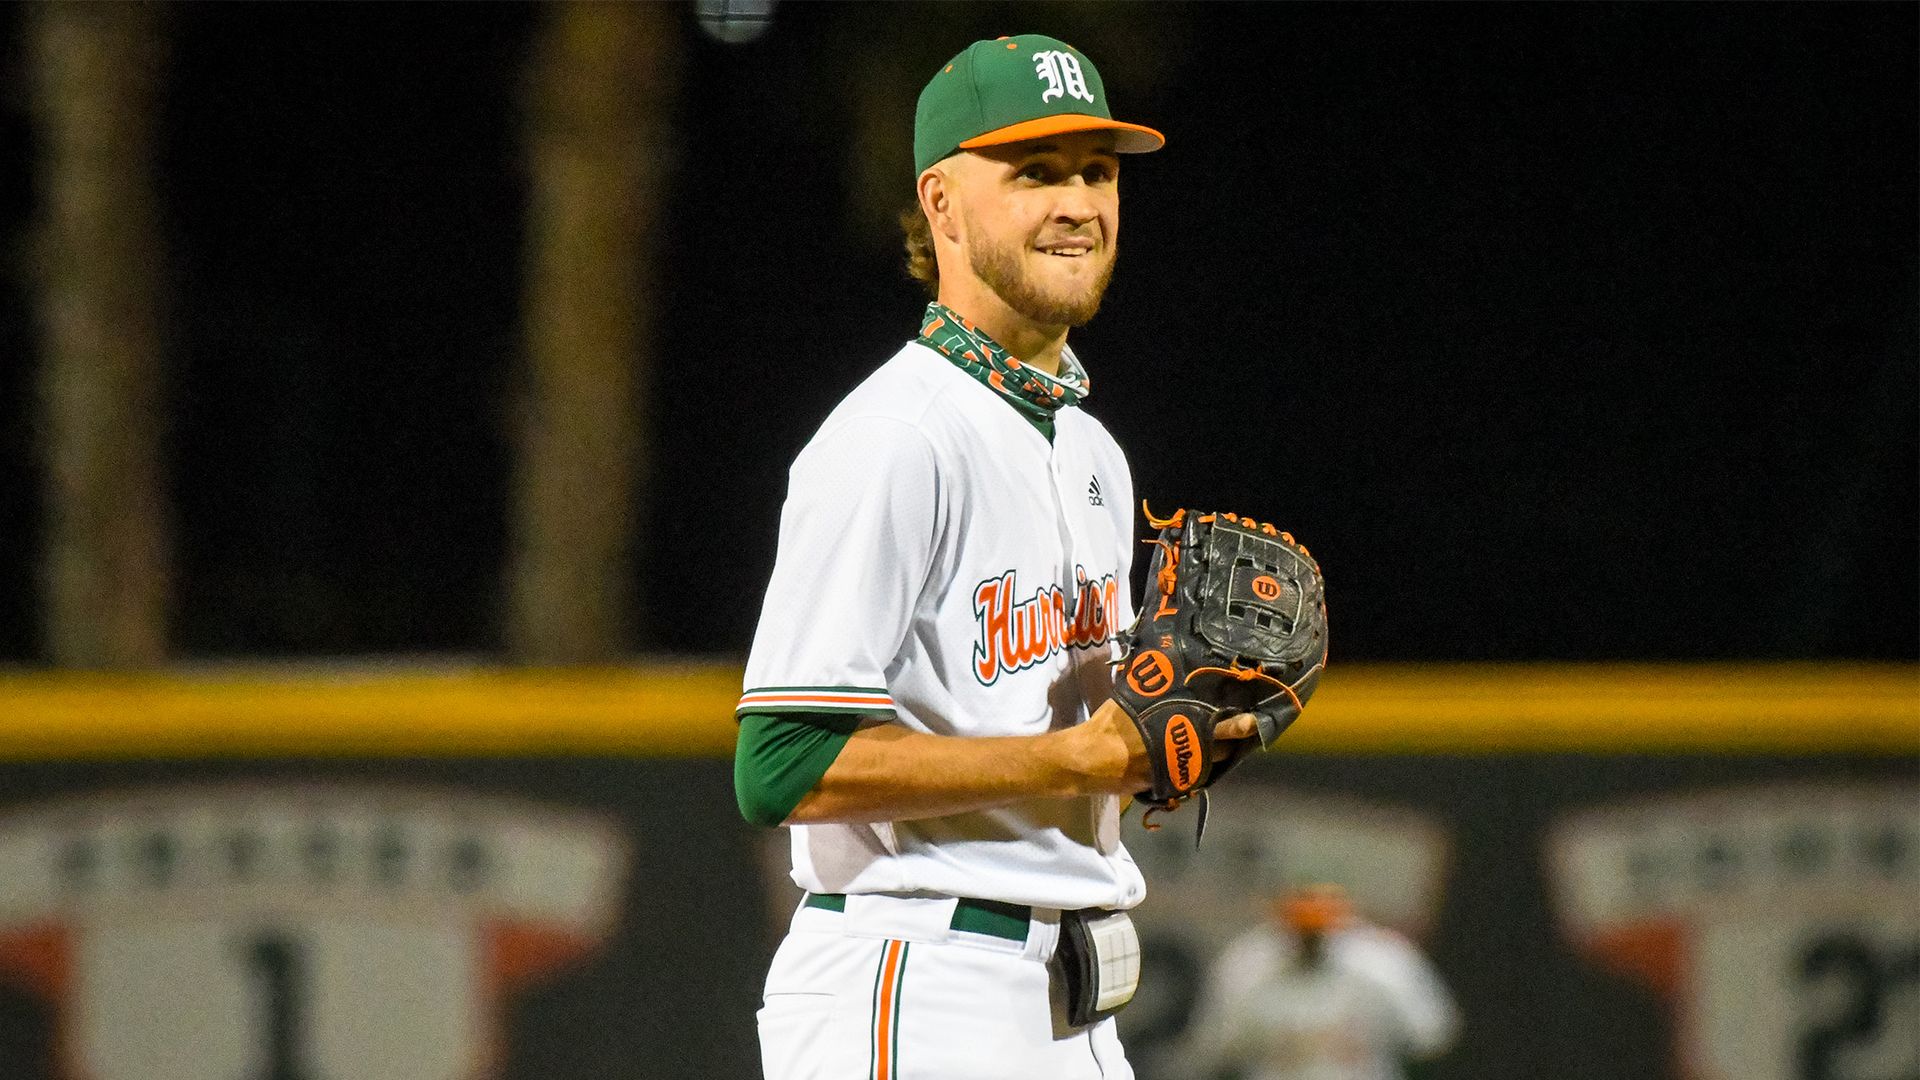 Palmquist named Perfect Game First Team All-American